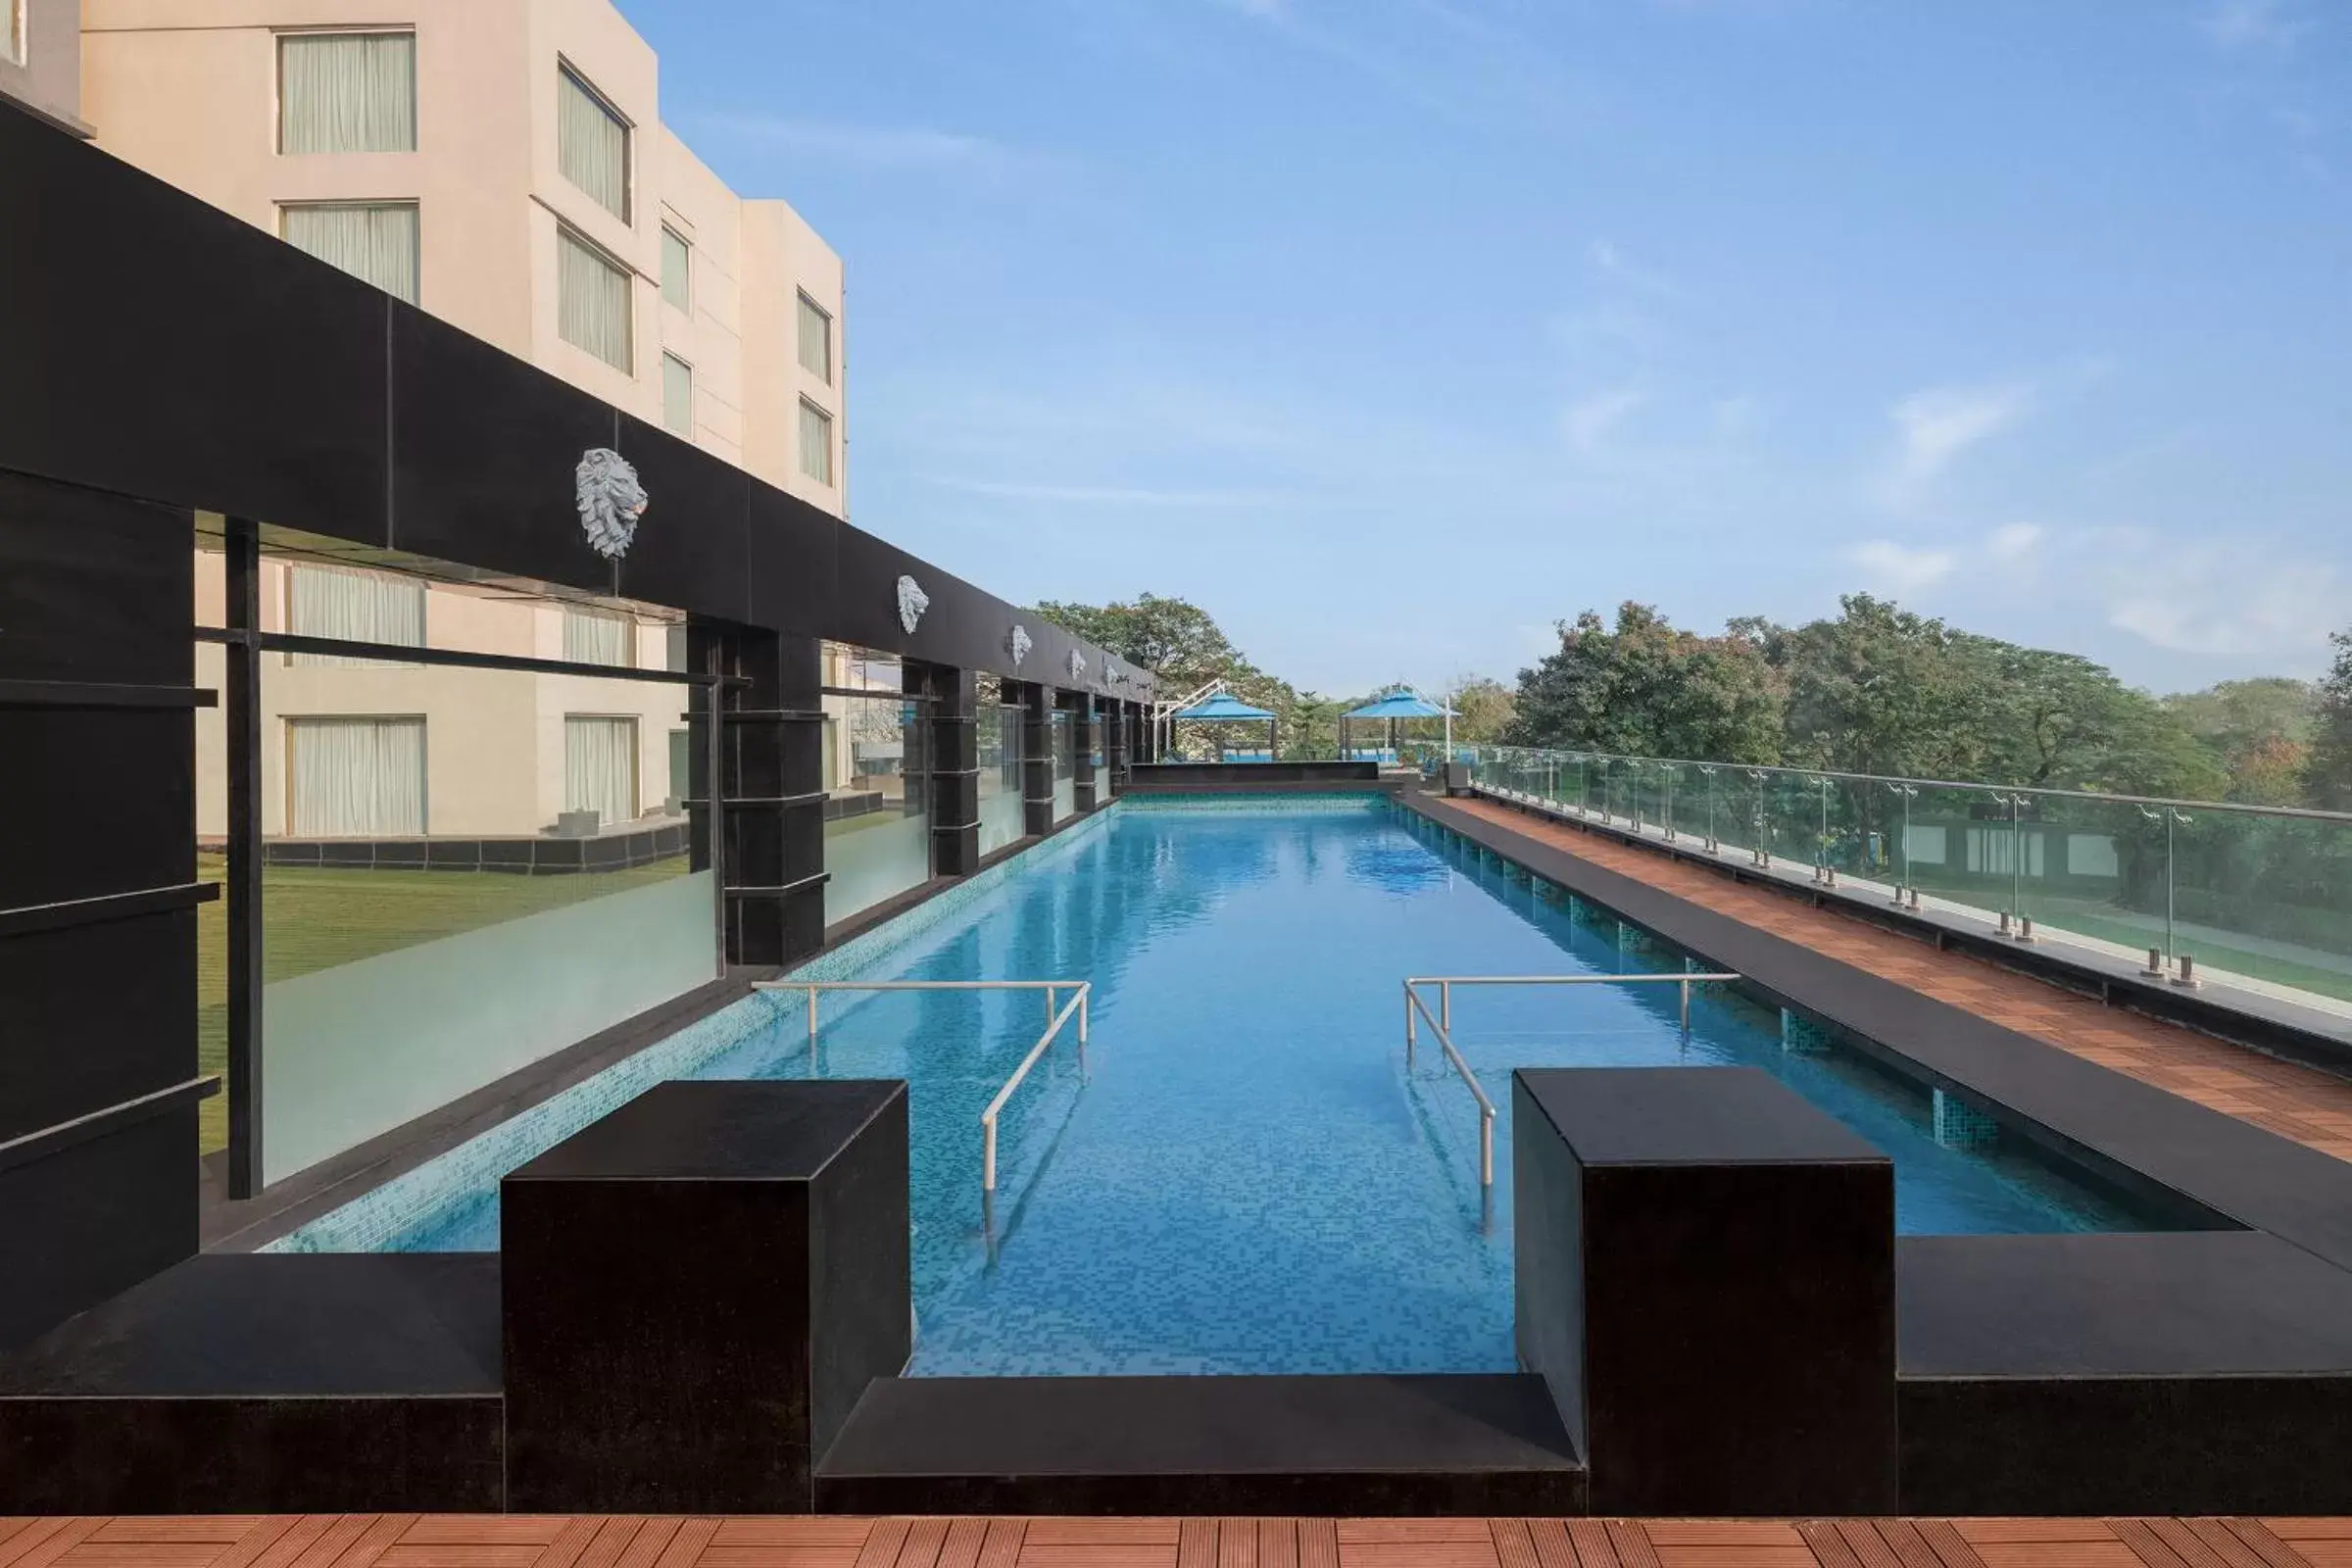 Swimming Pool in Indore Marriott Hotel